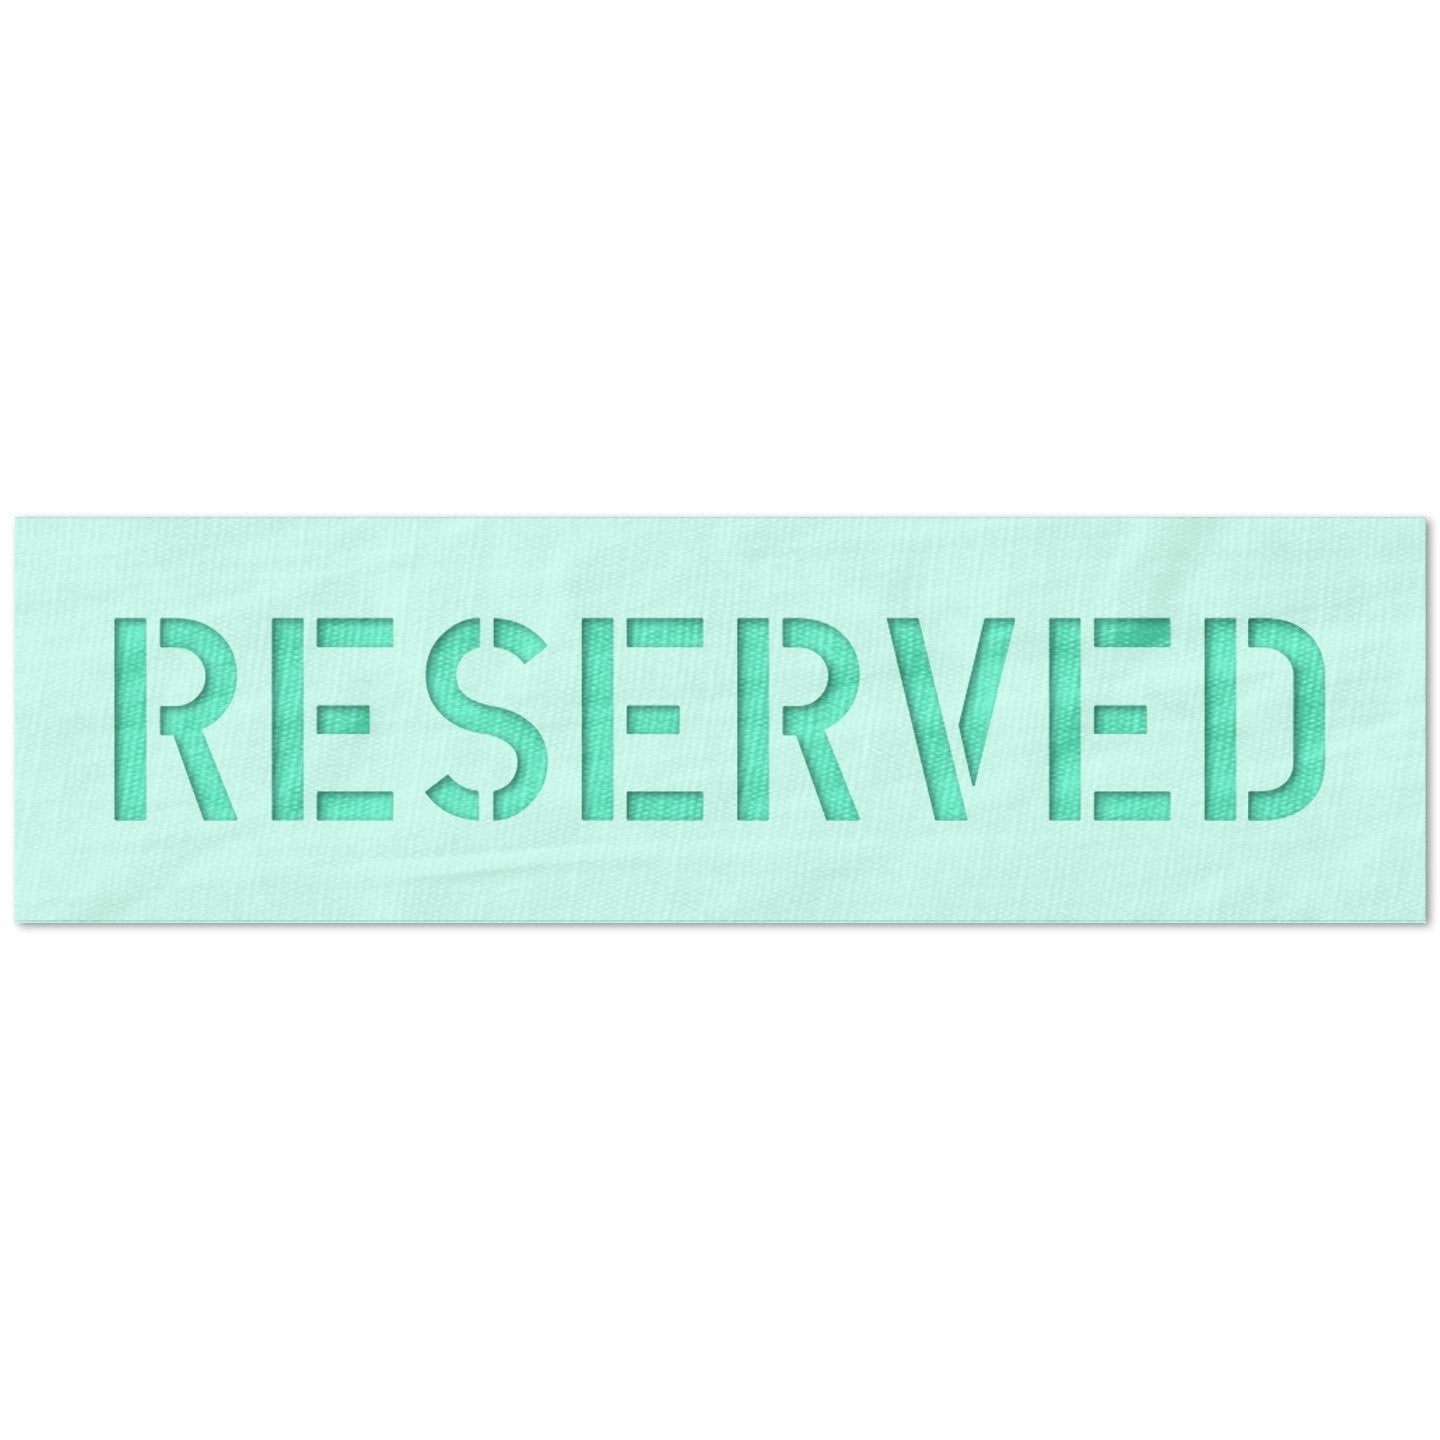 Reserved Parking Sign Stencil